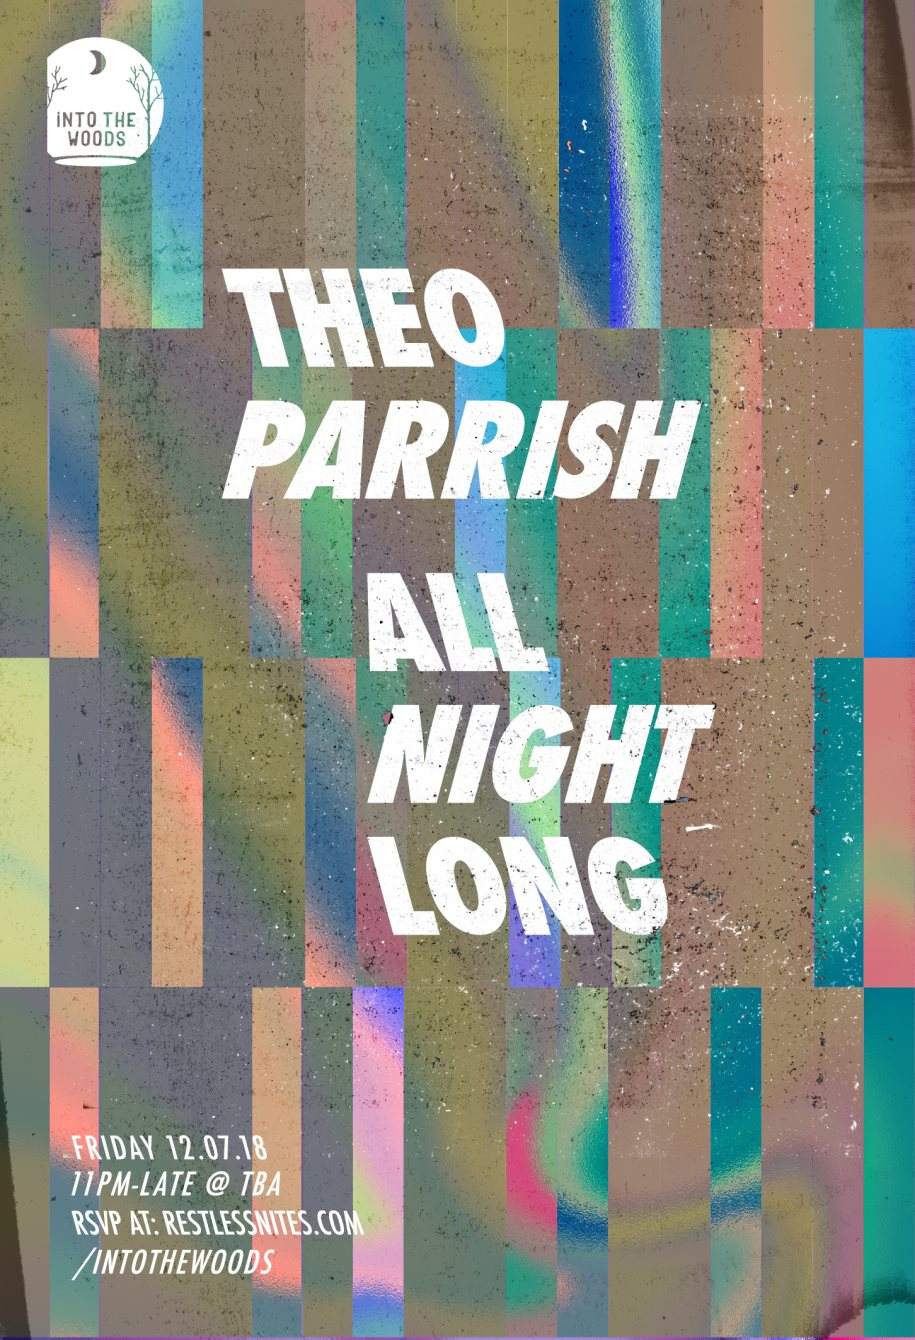 Into The Woods 2 Year Anniversary with Theo Parrish (All Night Long) - Página frontal